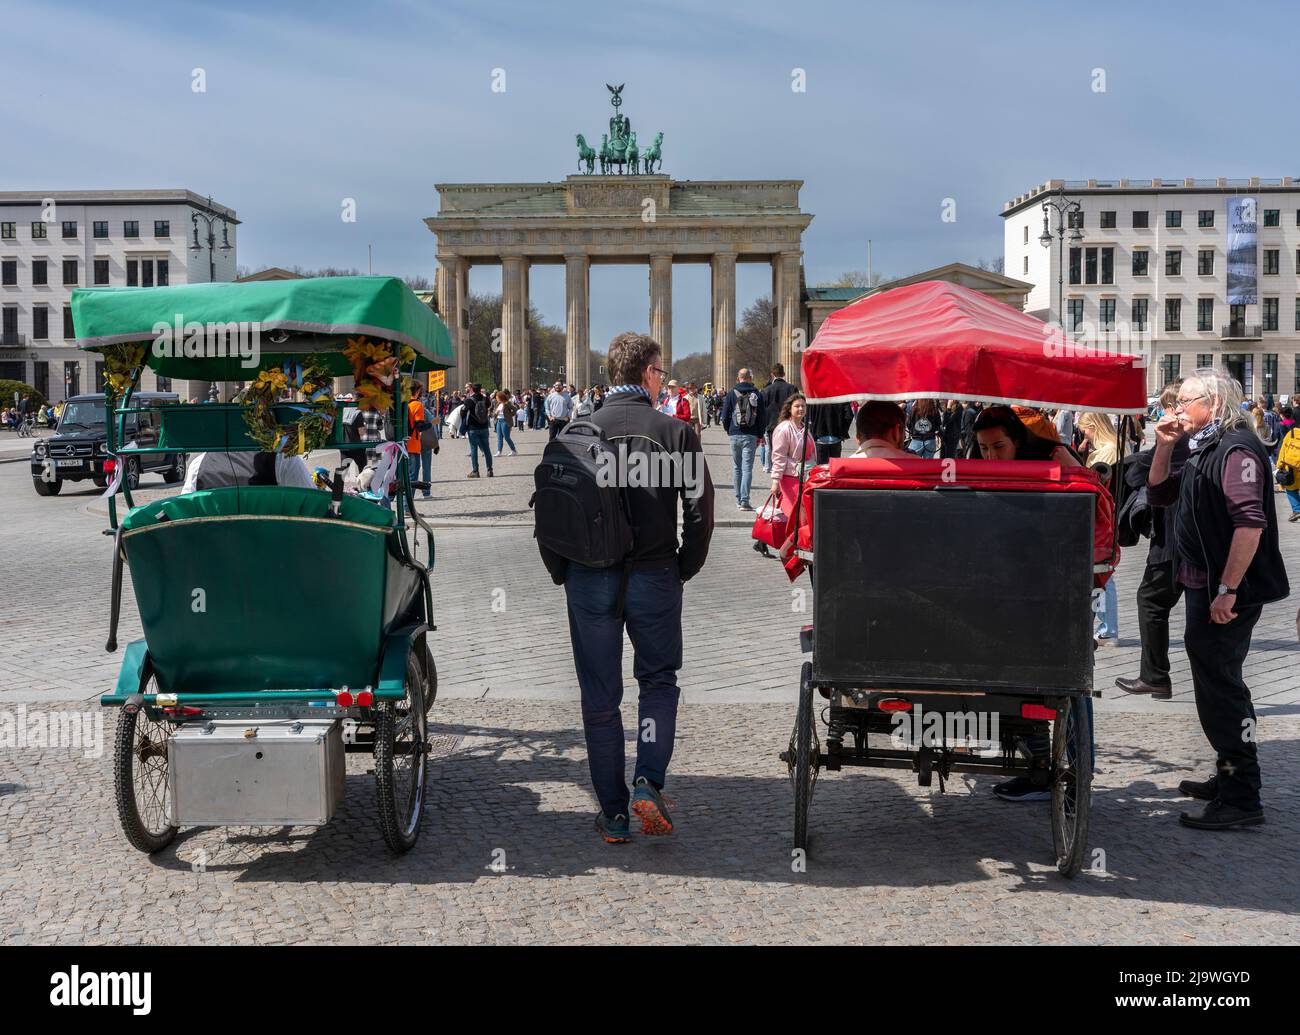 Tourists In Front Of The Brandenburg Gate, Berlin, Germany Stock Photo